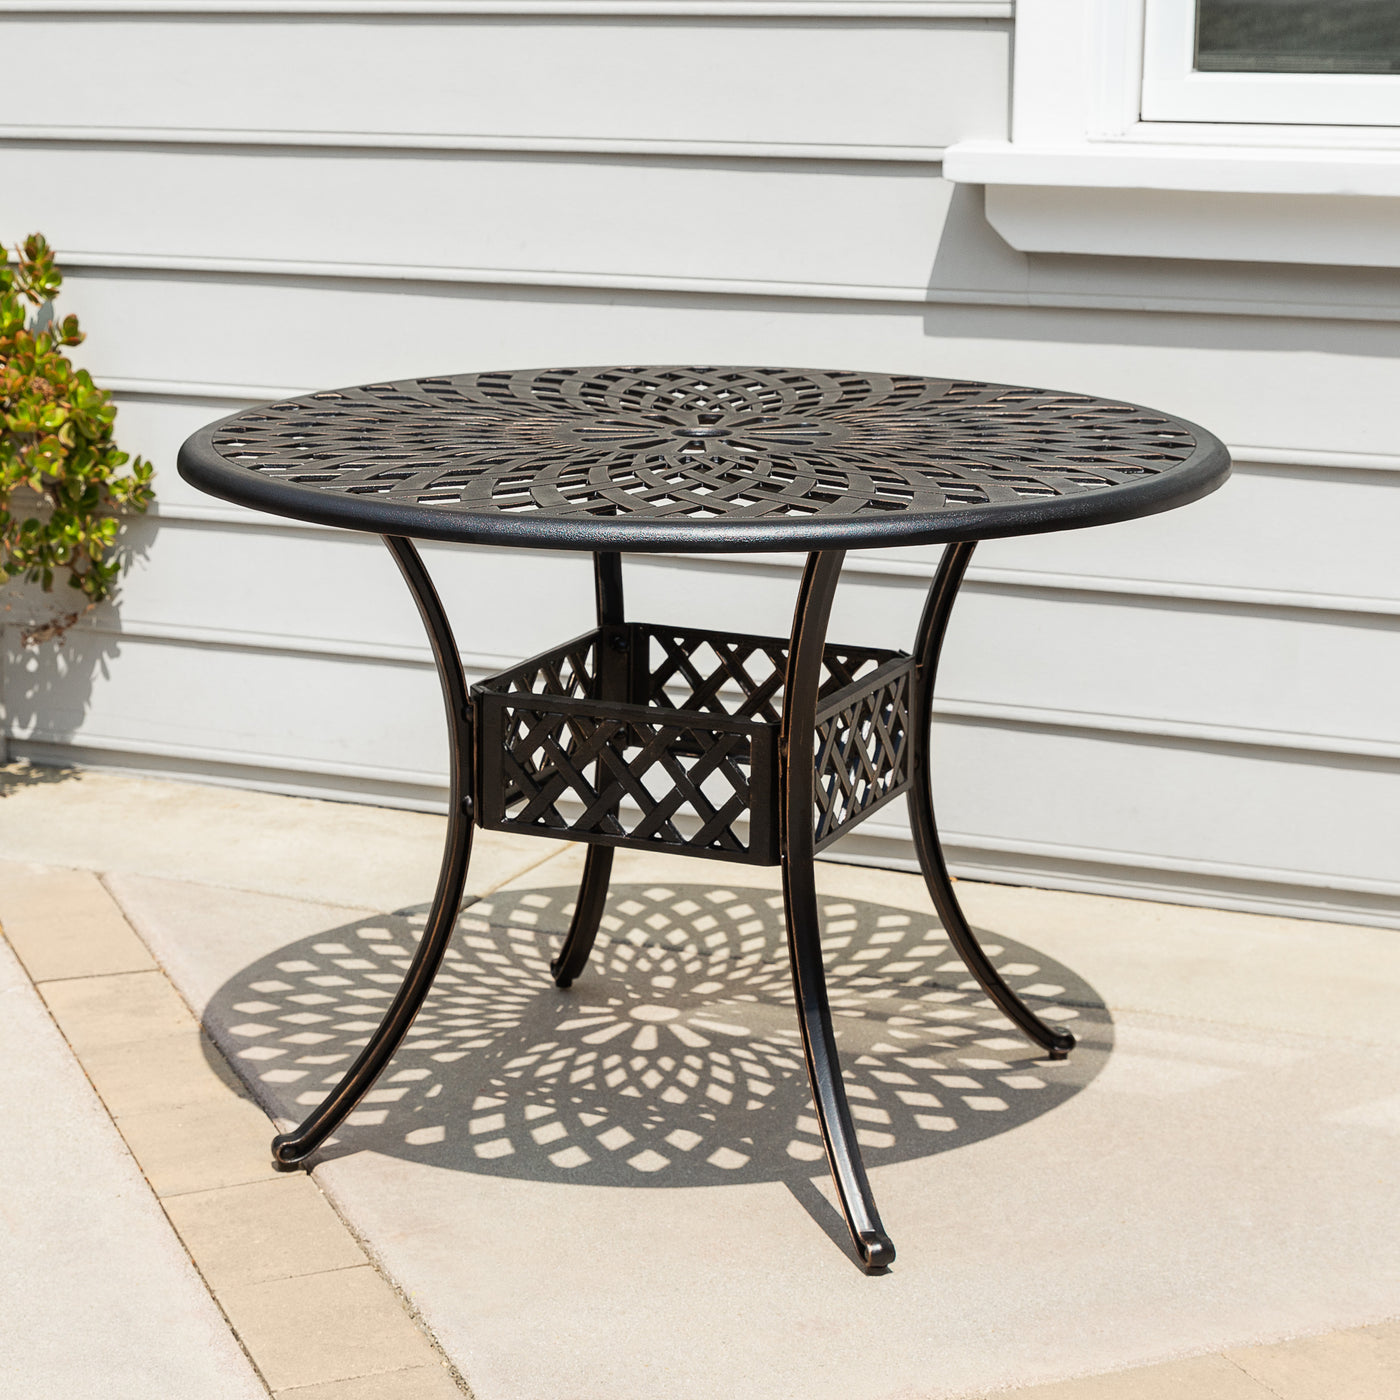 Aiden 41" Round Outdoor Dining Table for Patio